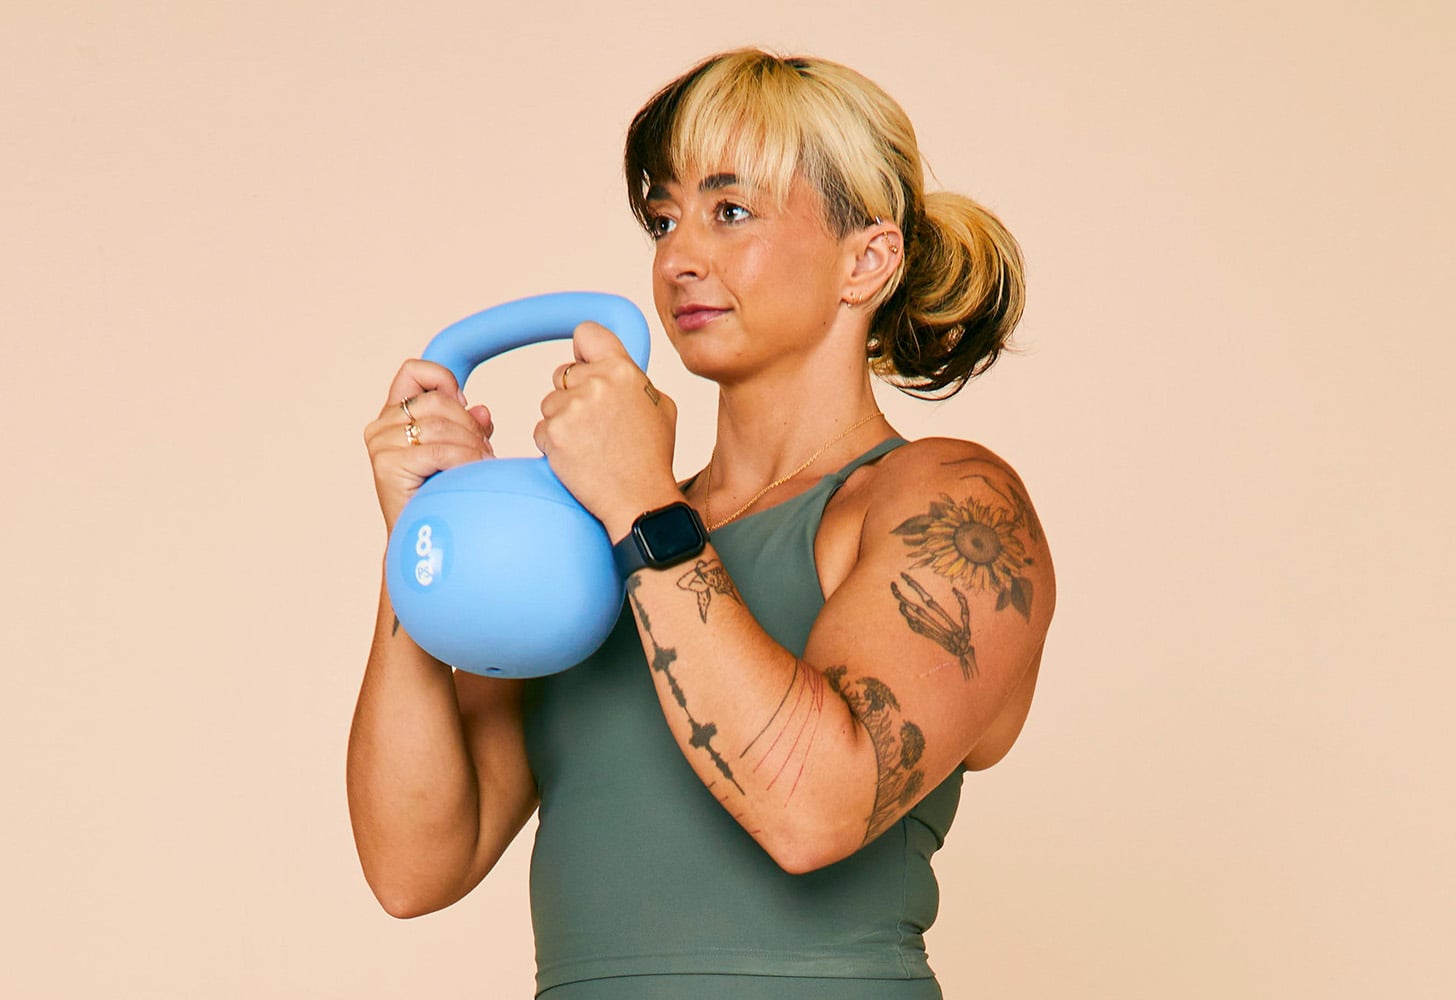 Kettlebell Workout: 8 Exercises for Cyclists